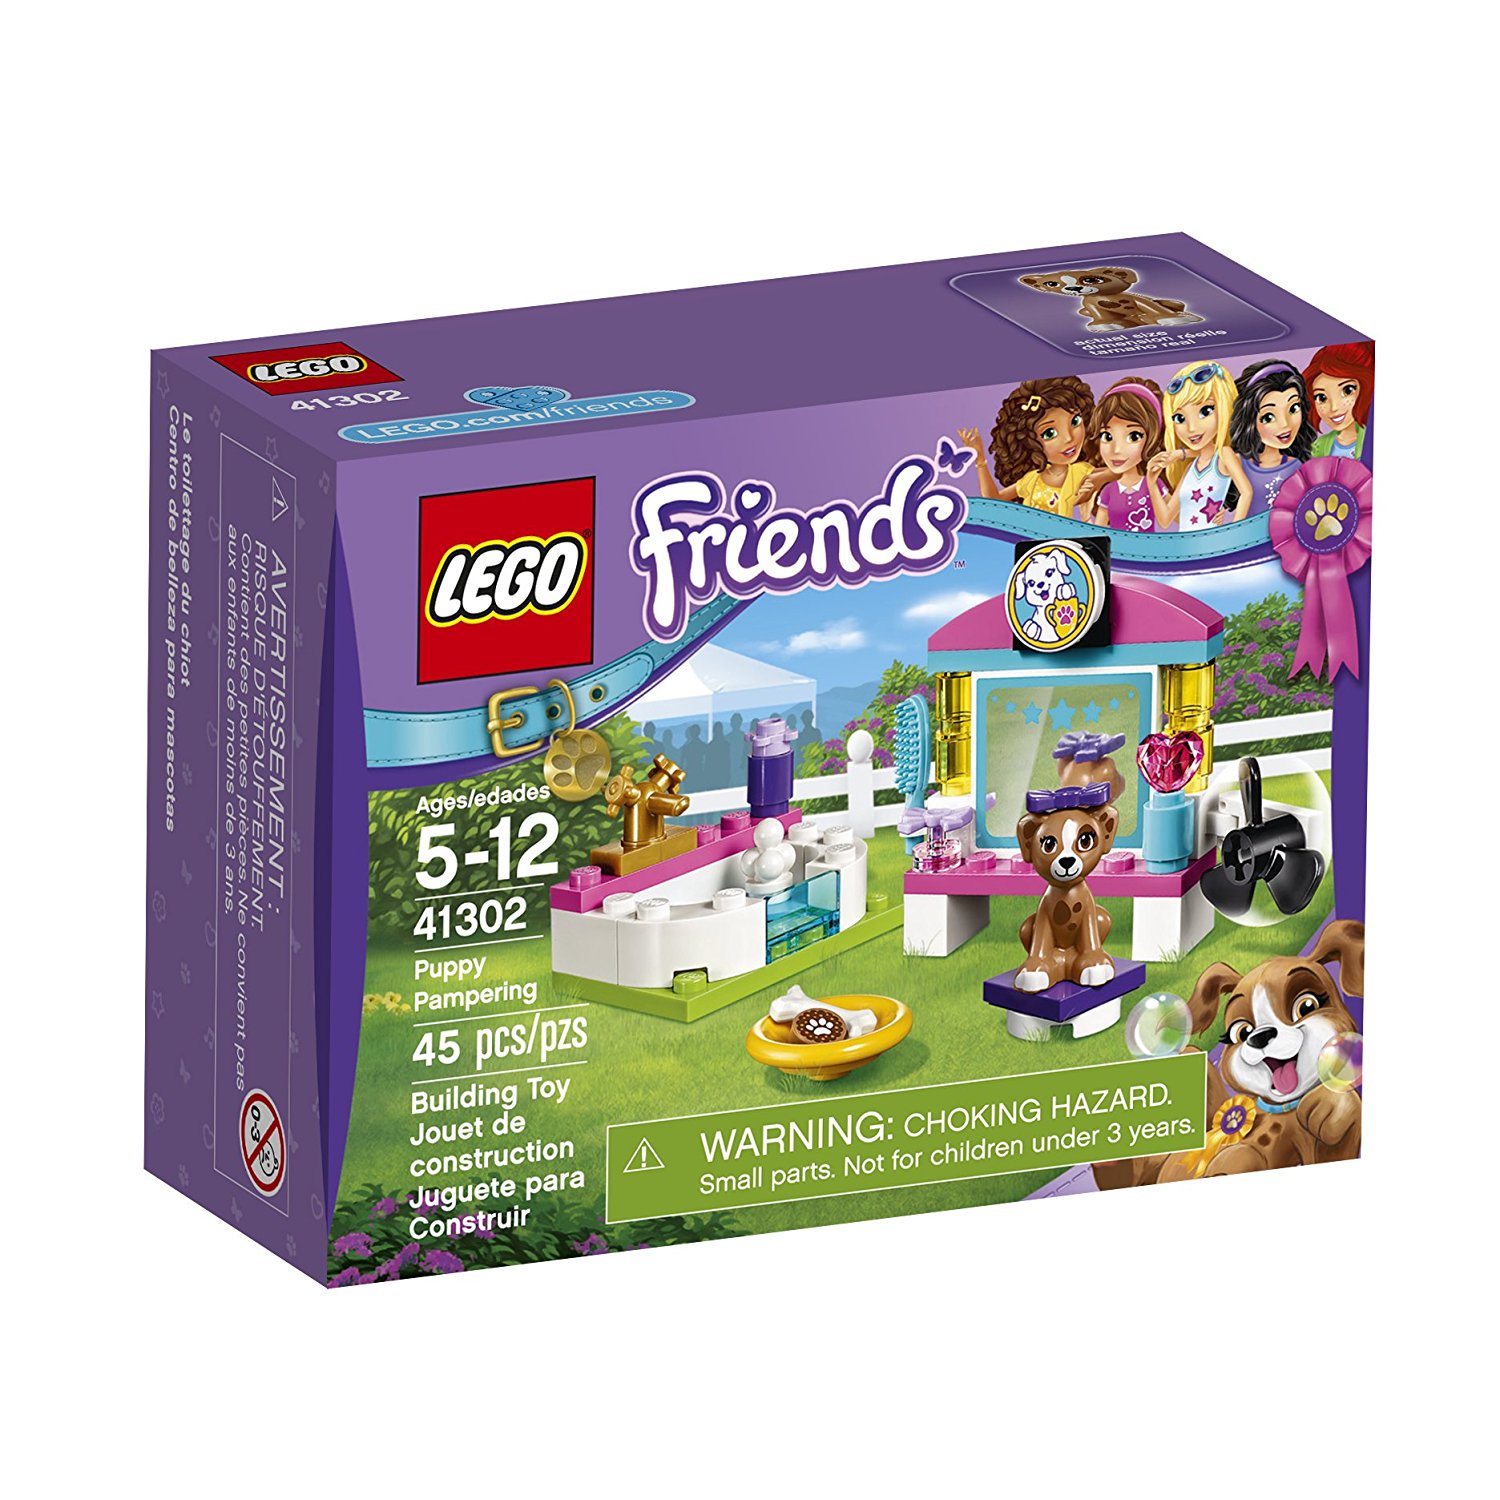 LEGO Friends Puppy Pampering 41302 Building Kit – Just $4.97!